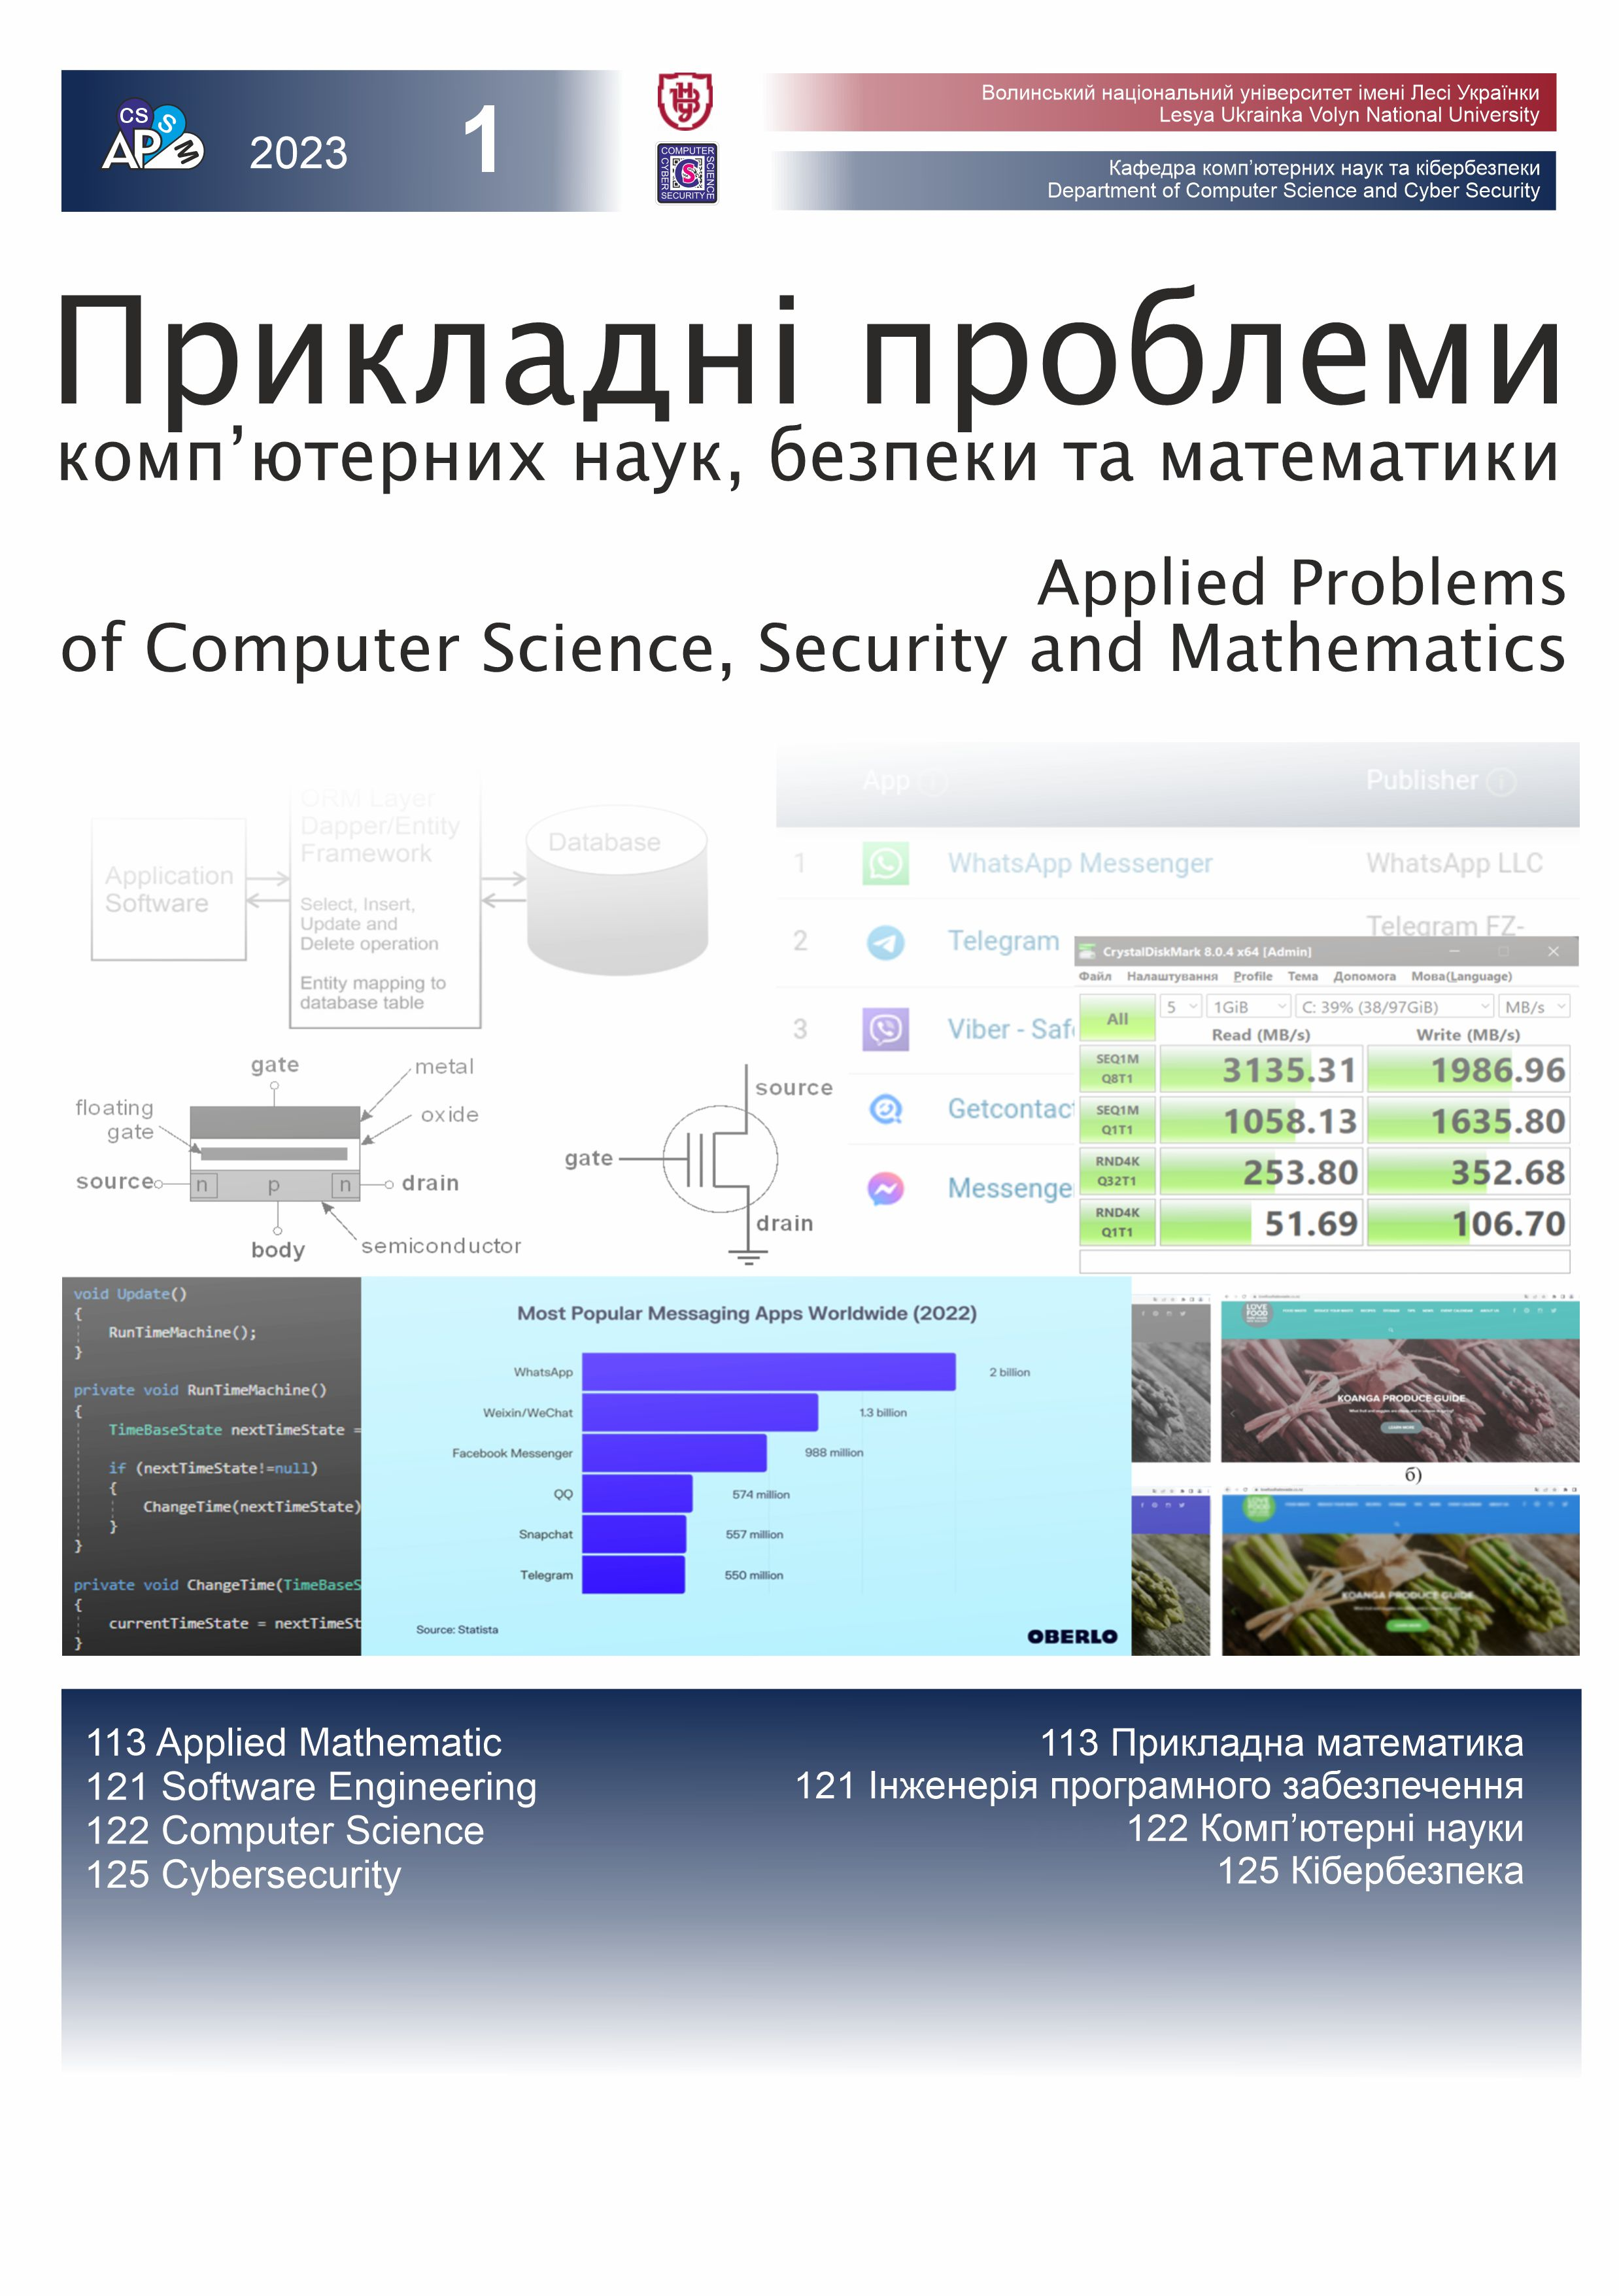 					View No. 1 (2023): Applied Problems of Computer Science, Security and Mathematics
				